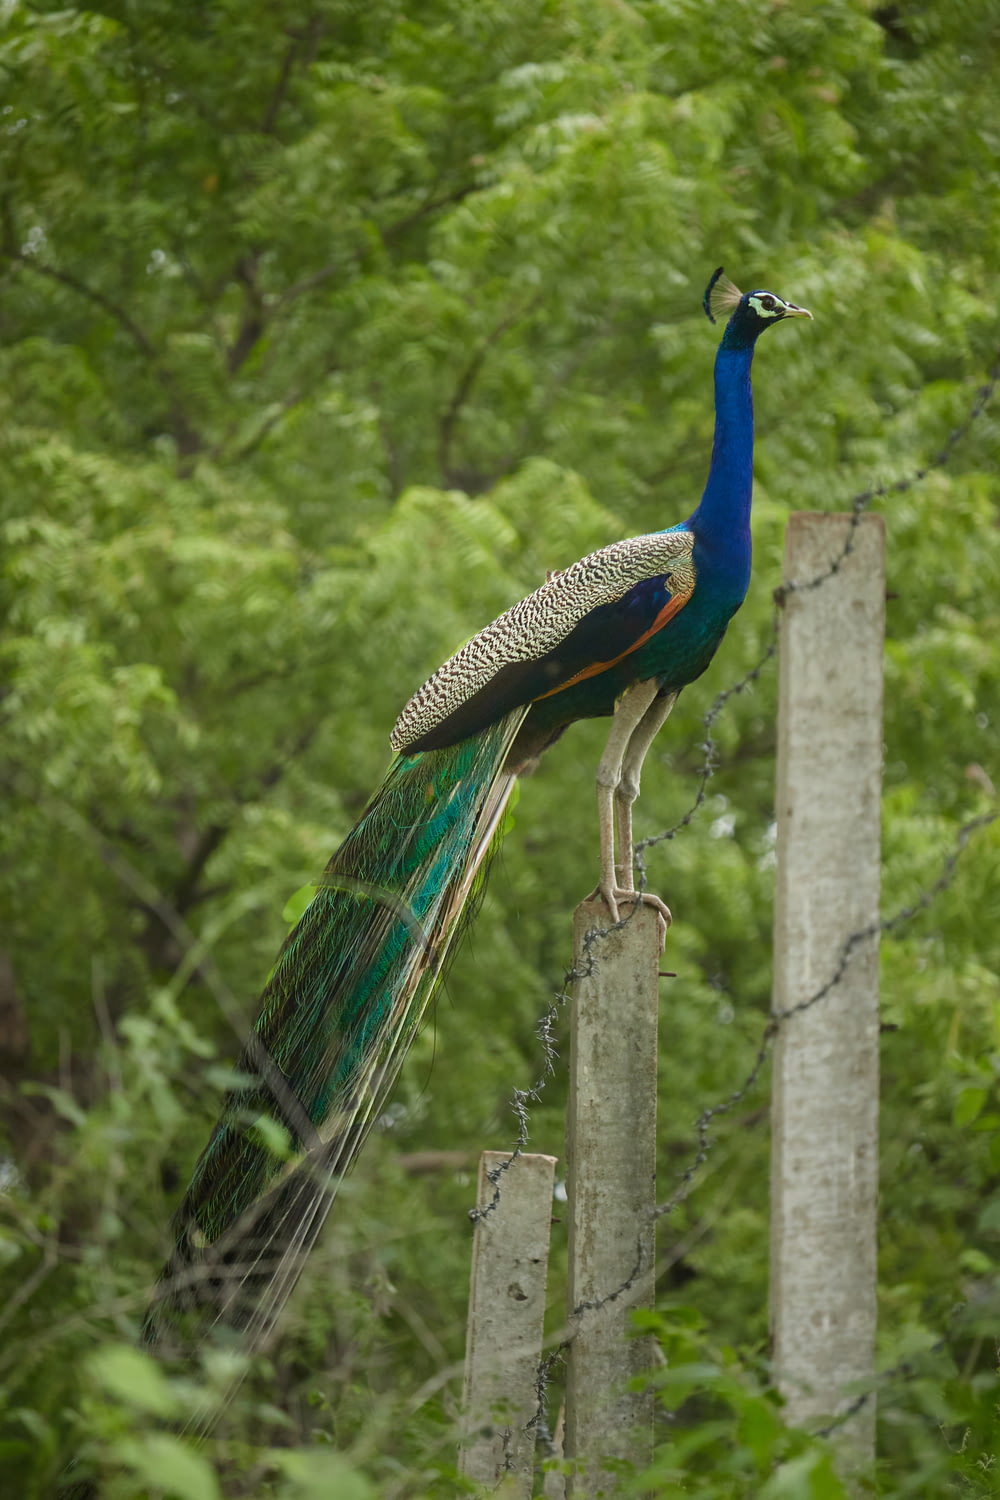 blue green and black peacock on wooden fence during daytime